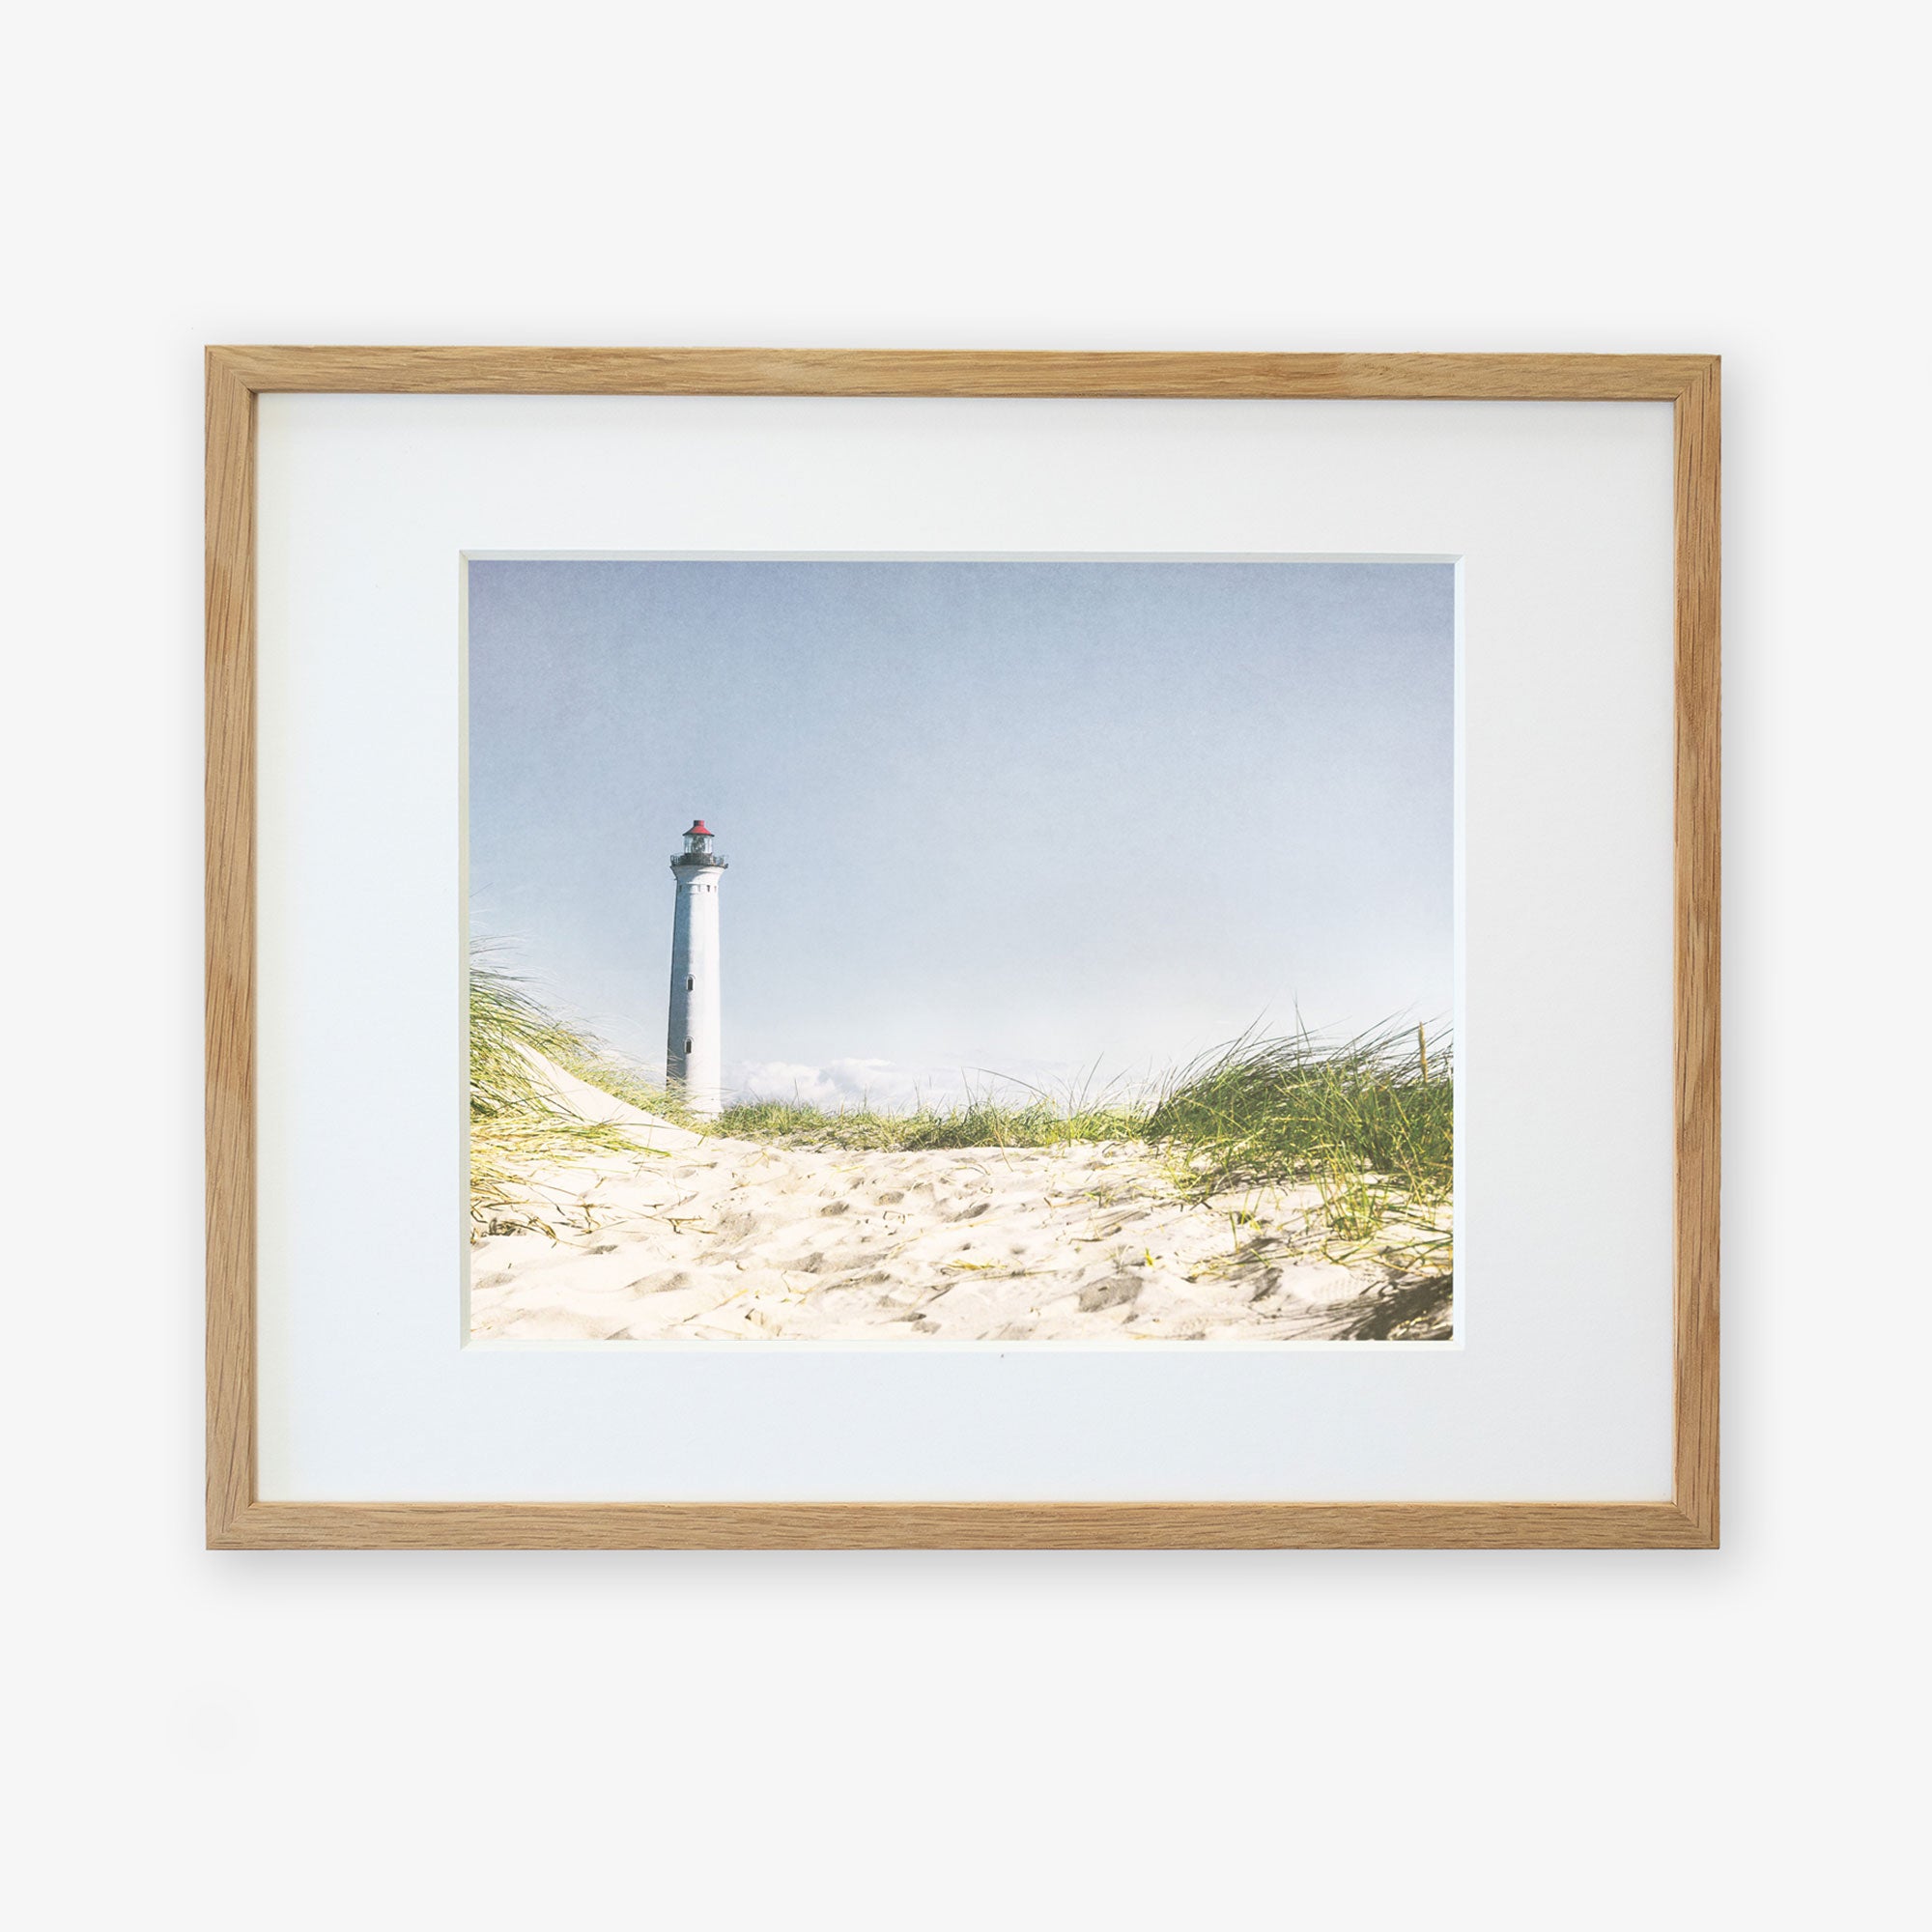 A framed Nautical Print, 'The Lighthouse' by Offley Green of a lighthouse viewed from a sandy beach overgrown with tall grass, displayed against a white background. The lighthouse stands tall against a clear blue sky.